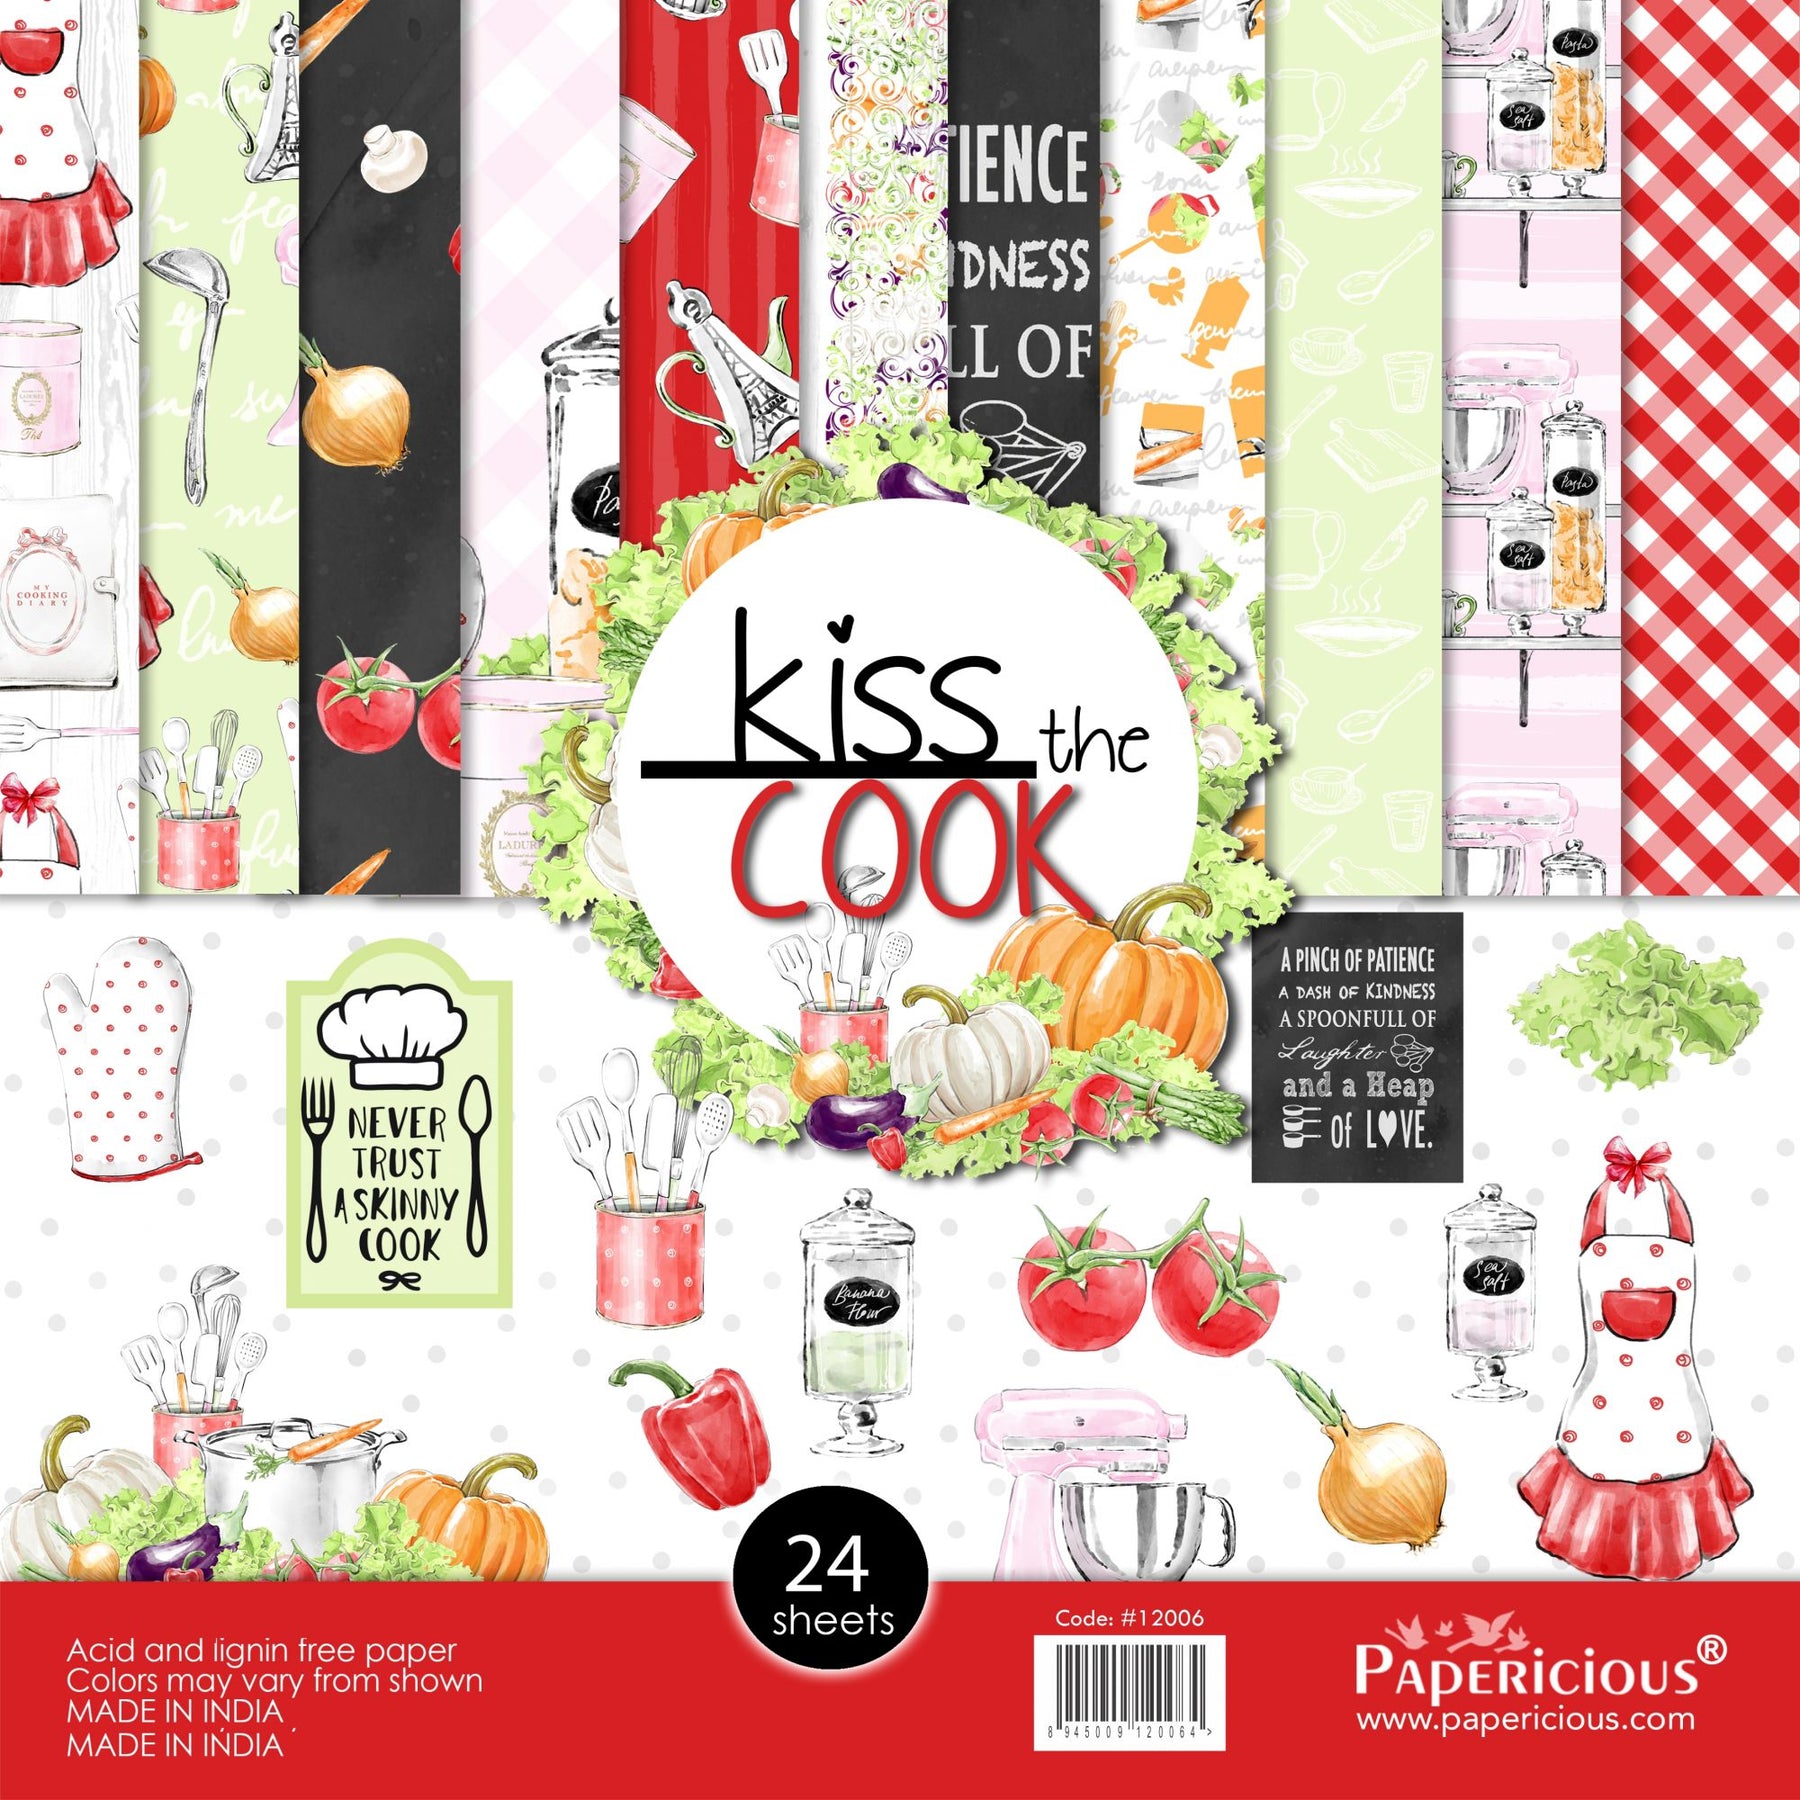 PAPERICIOUS - Kiss the Cook -  Designer Pattern Printed Scrapbook Papers / 24 sheets